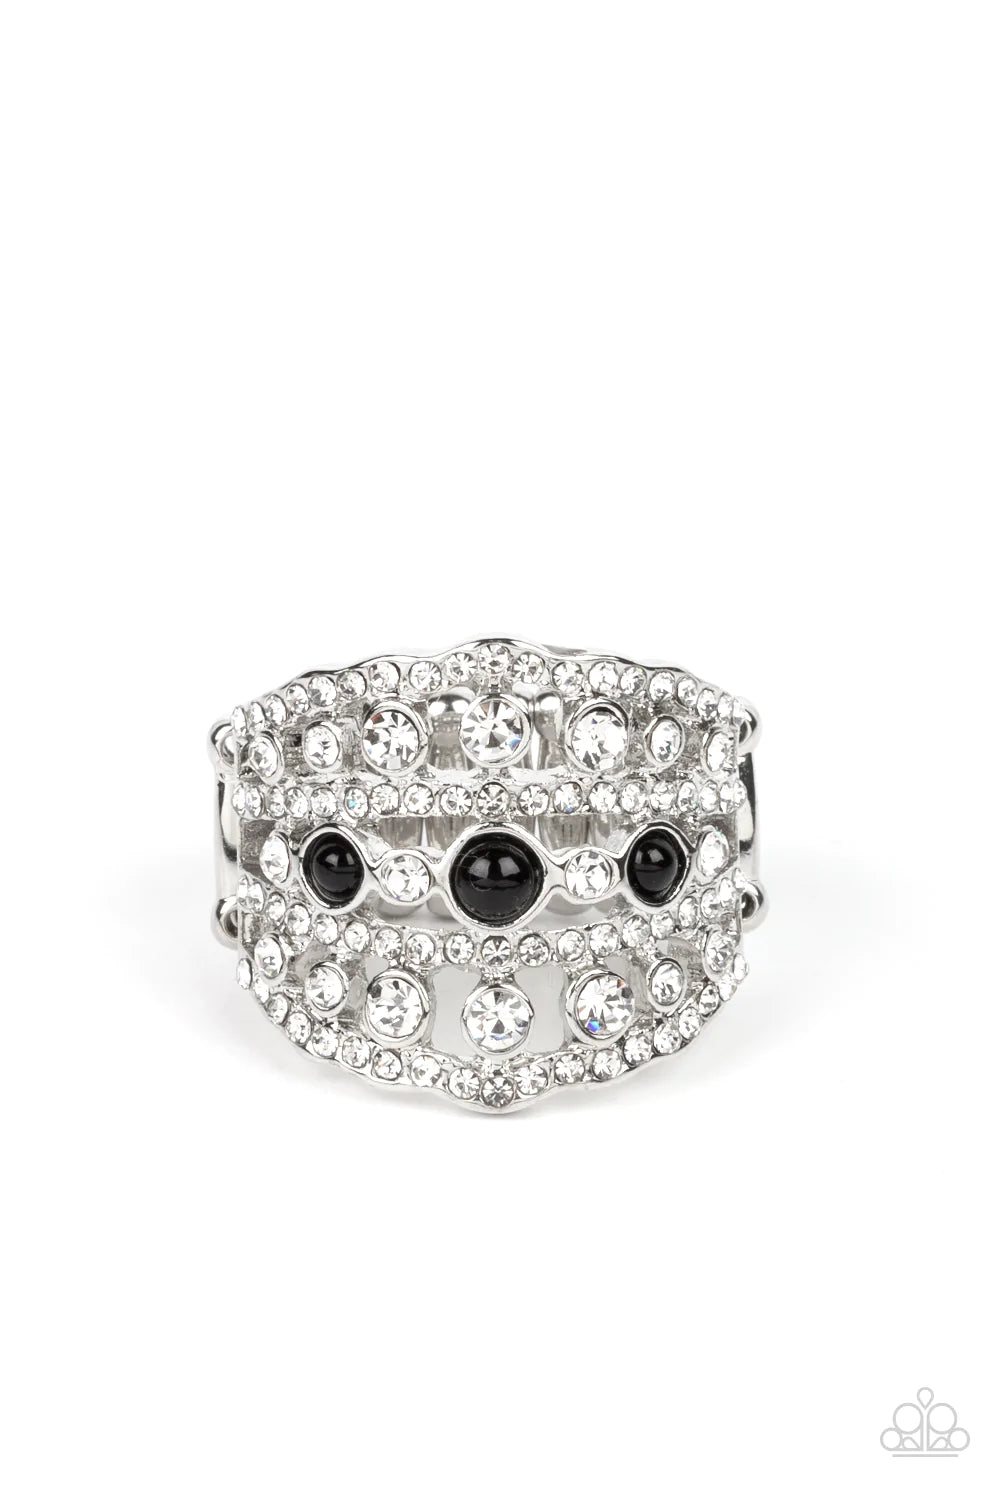 Paparazzi Accessories Sailboat Bling Layers of dainty silver bands, encrusted with sparkling white rhinestones, are accented with a trio of dainty black beads on the centermost band. The stacked layers sweep across the finger, making an exquisite centerpi